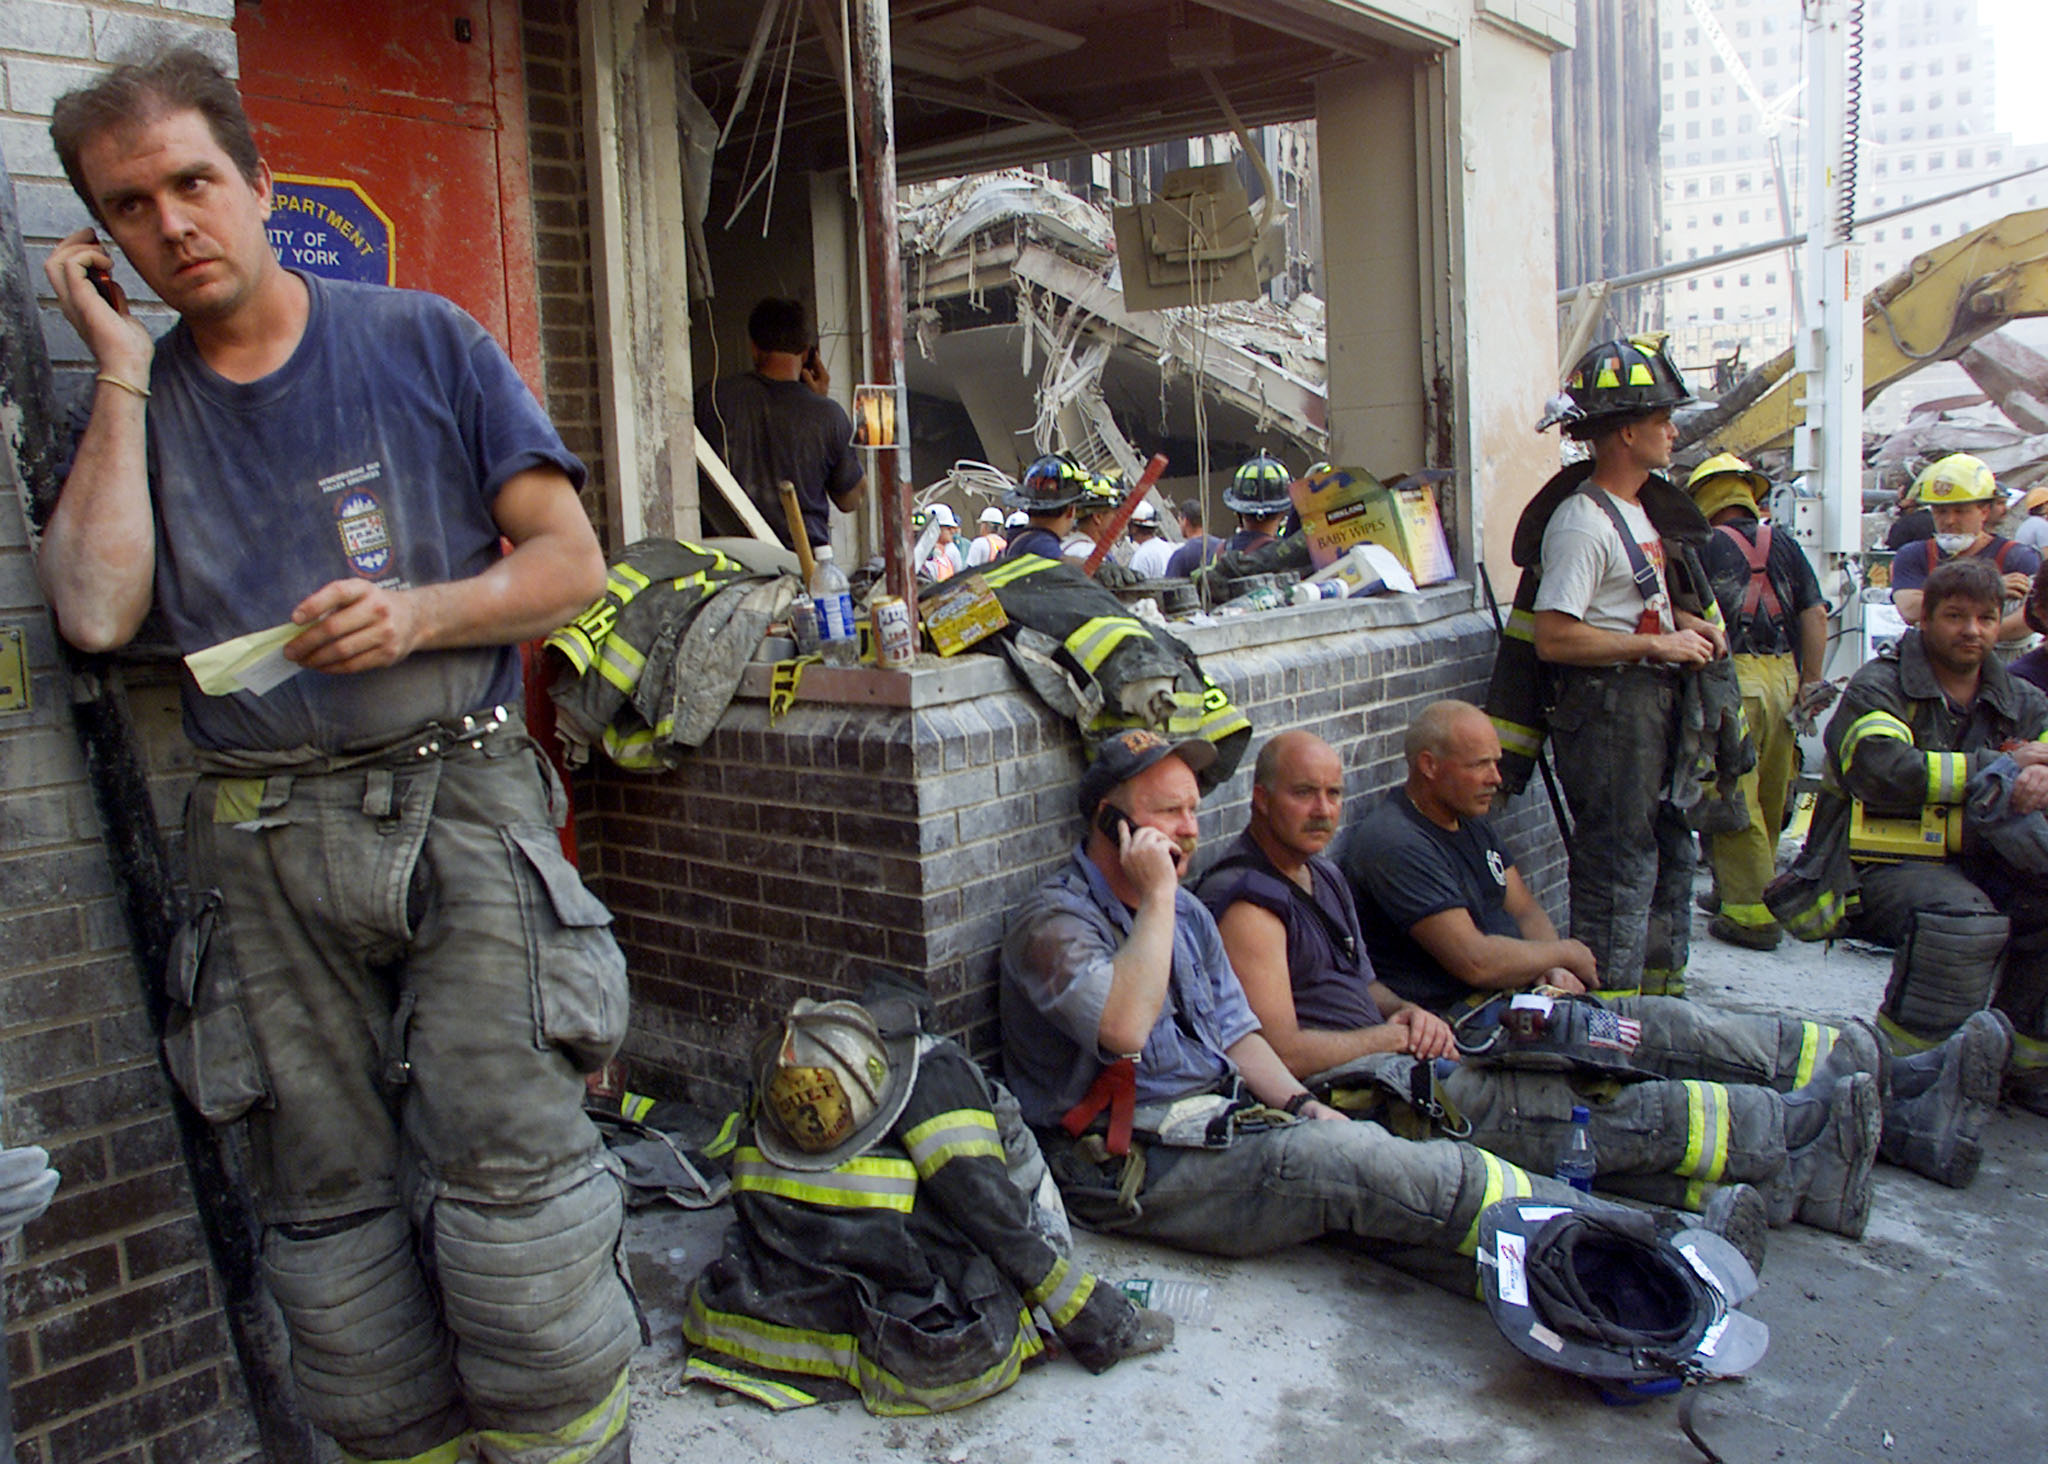 Firemen from around the nation gather at a destroyed firehouse next to the towers as they take a break from rescue efforts in New York September 13, 2001. (Photo: REUTERS/Newscom)